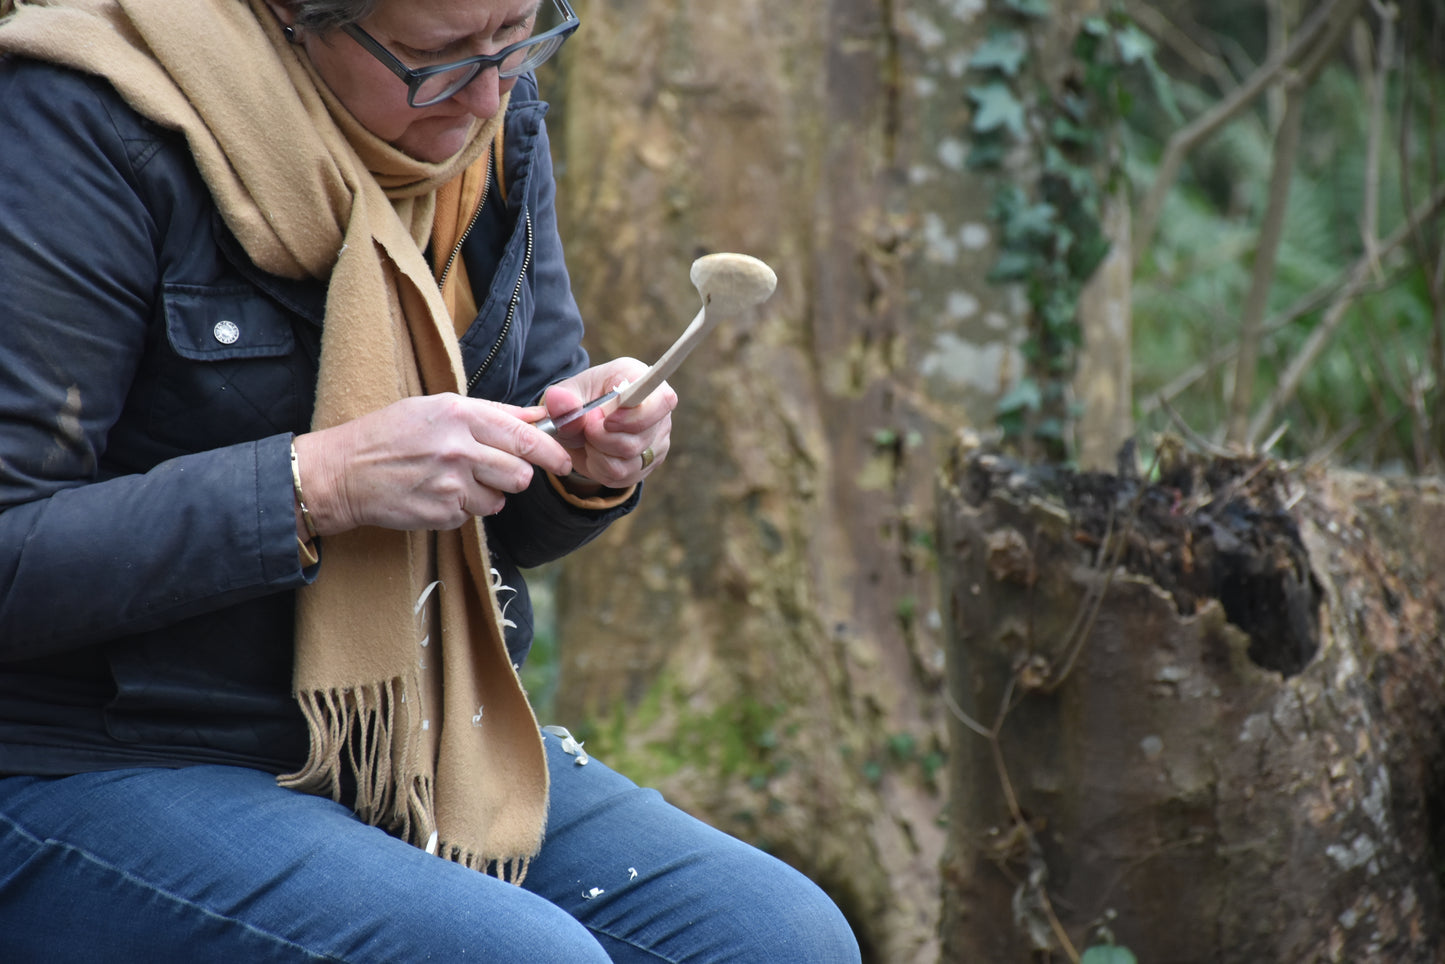 Introduction to Spoon Carving Workshop - 16.06.24 (AM)